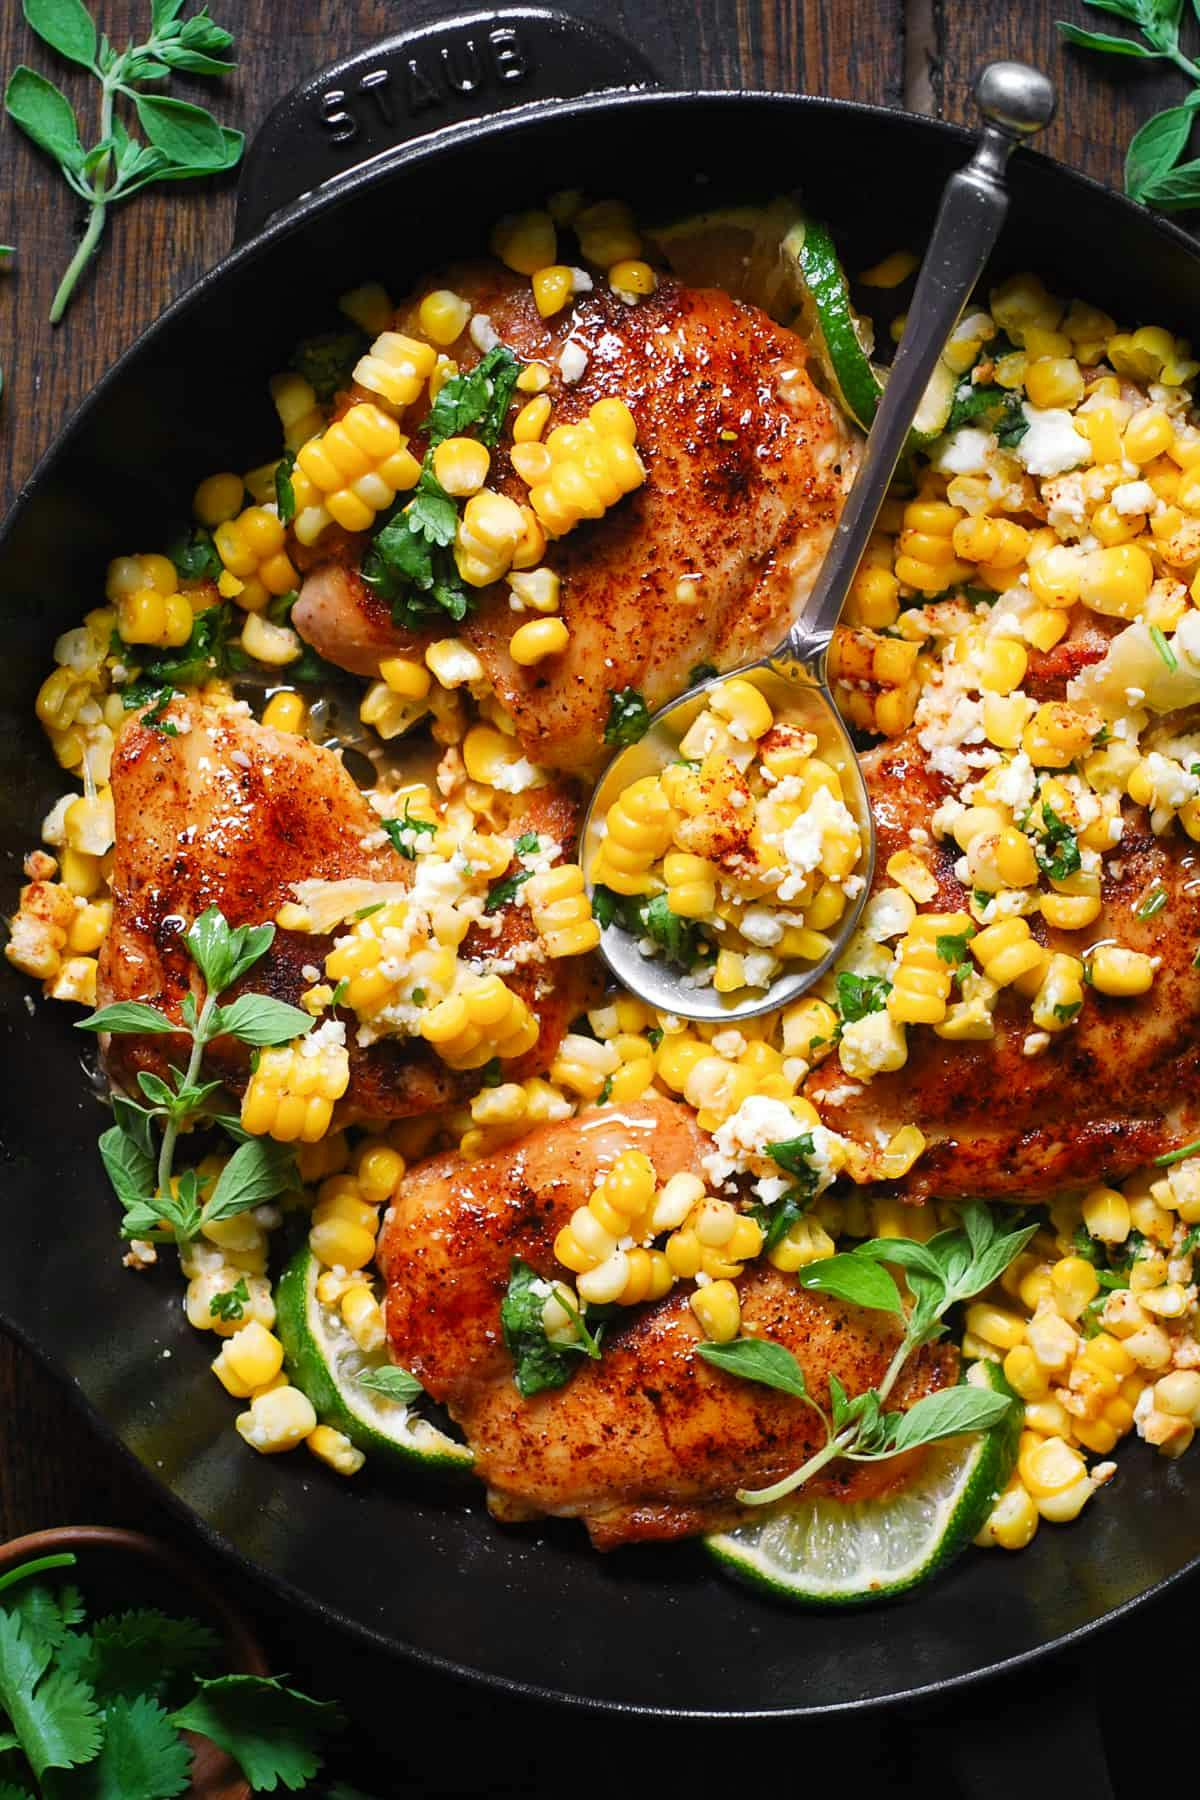 Cilantro-Lime Chicken with Corn and Cotija Cheese (or Feta)